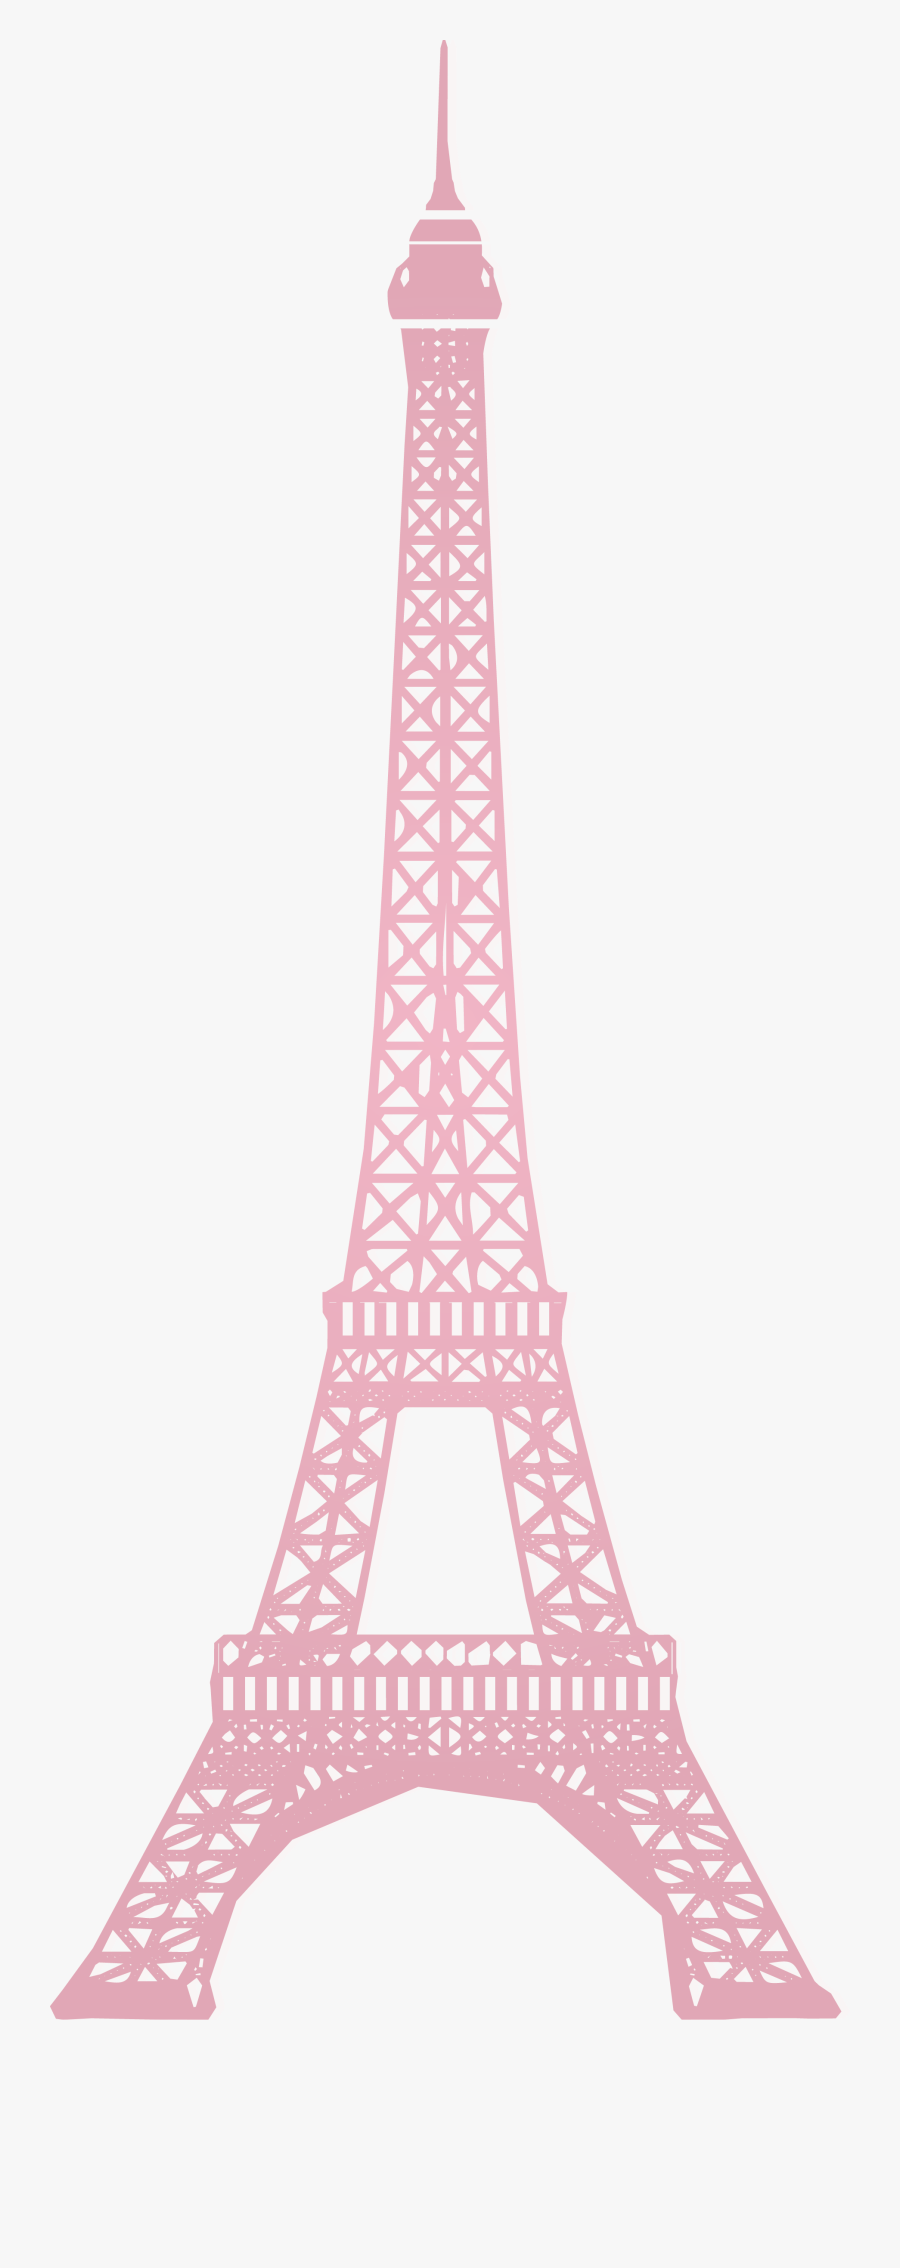 Eiffel Tower Monument Wall Decal - Pink Eiffel Tower, Transparent Clipart